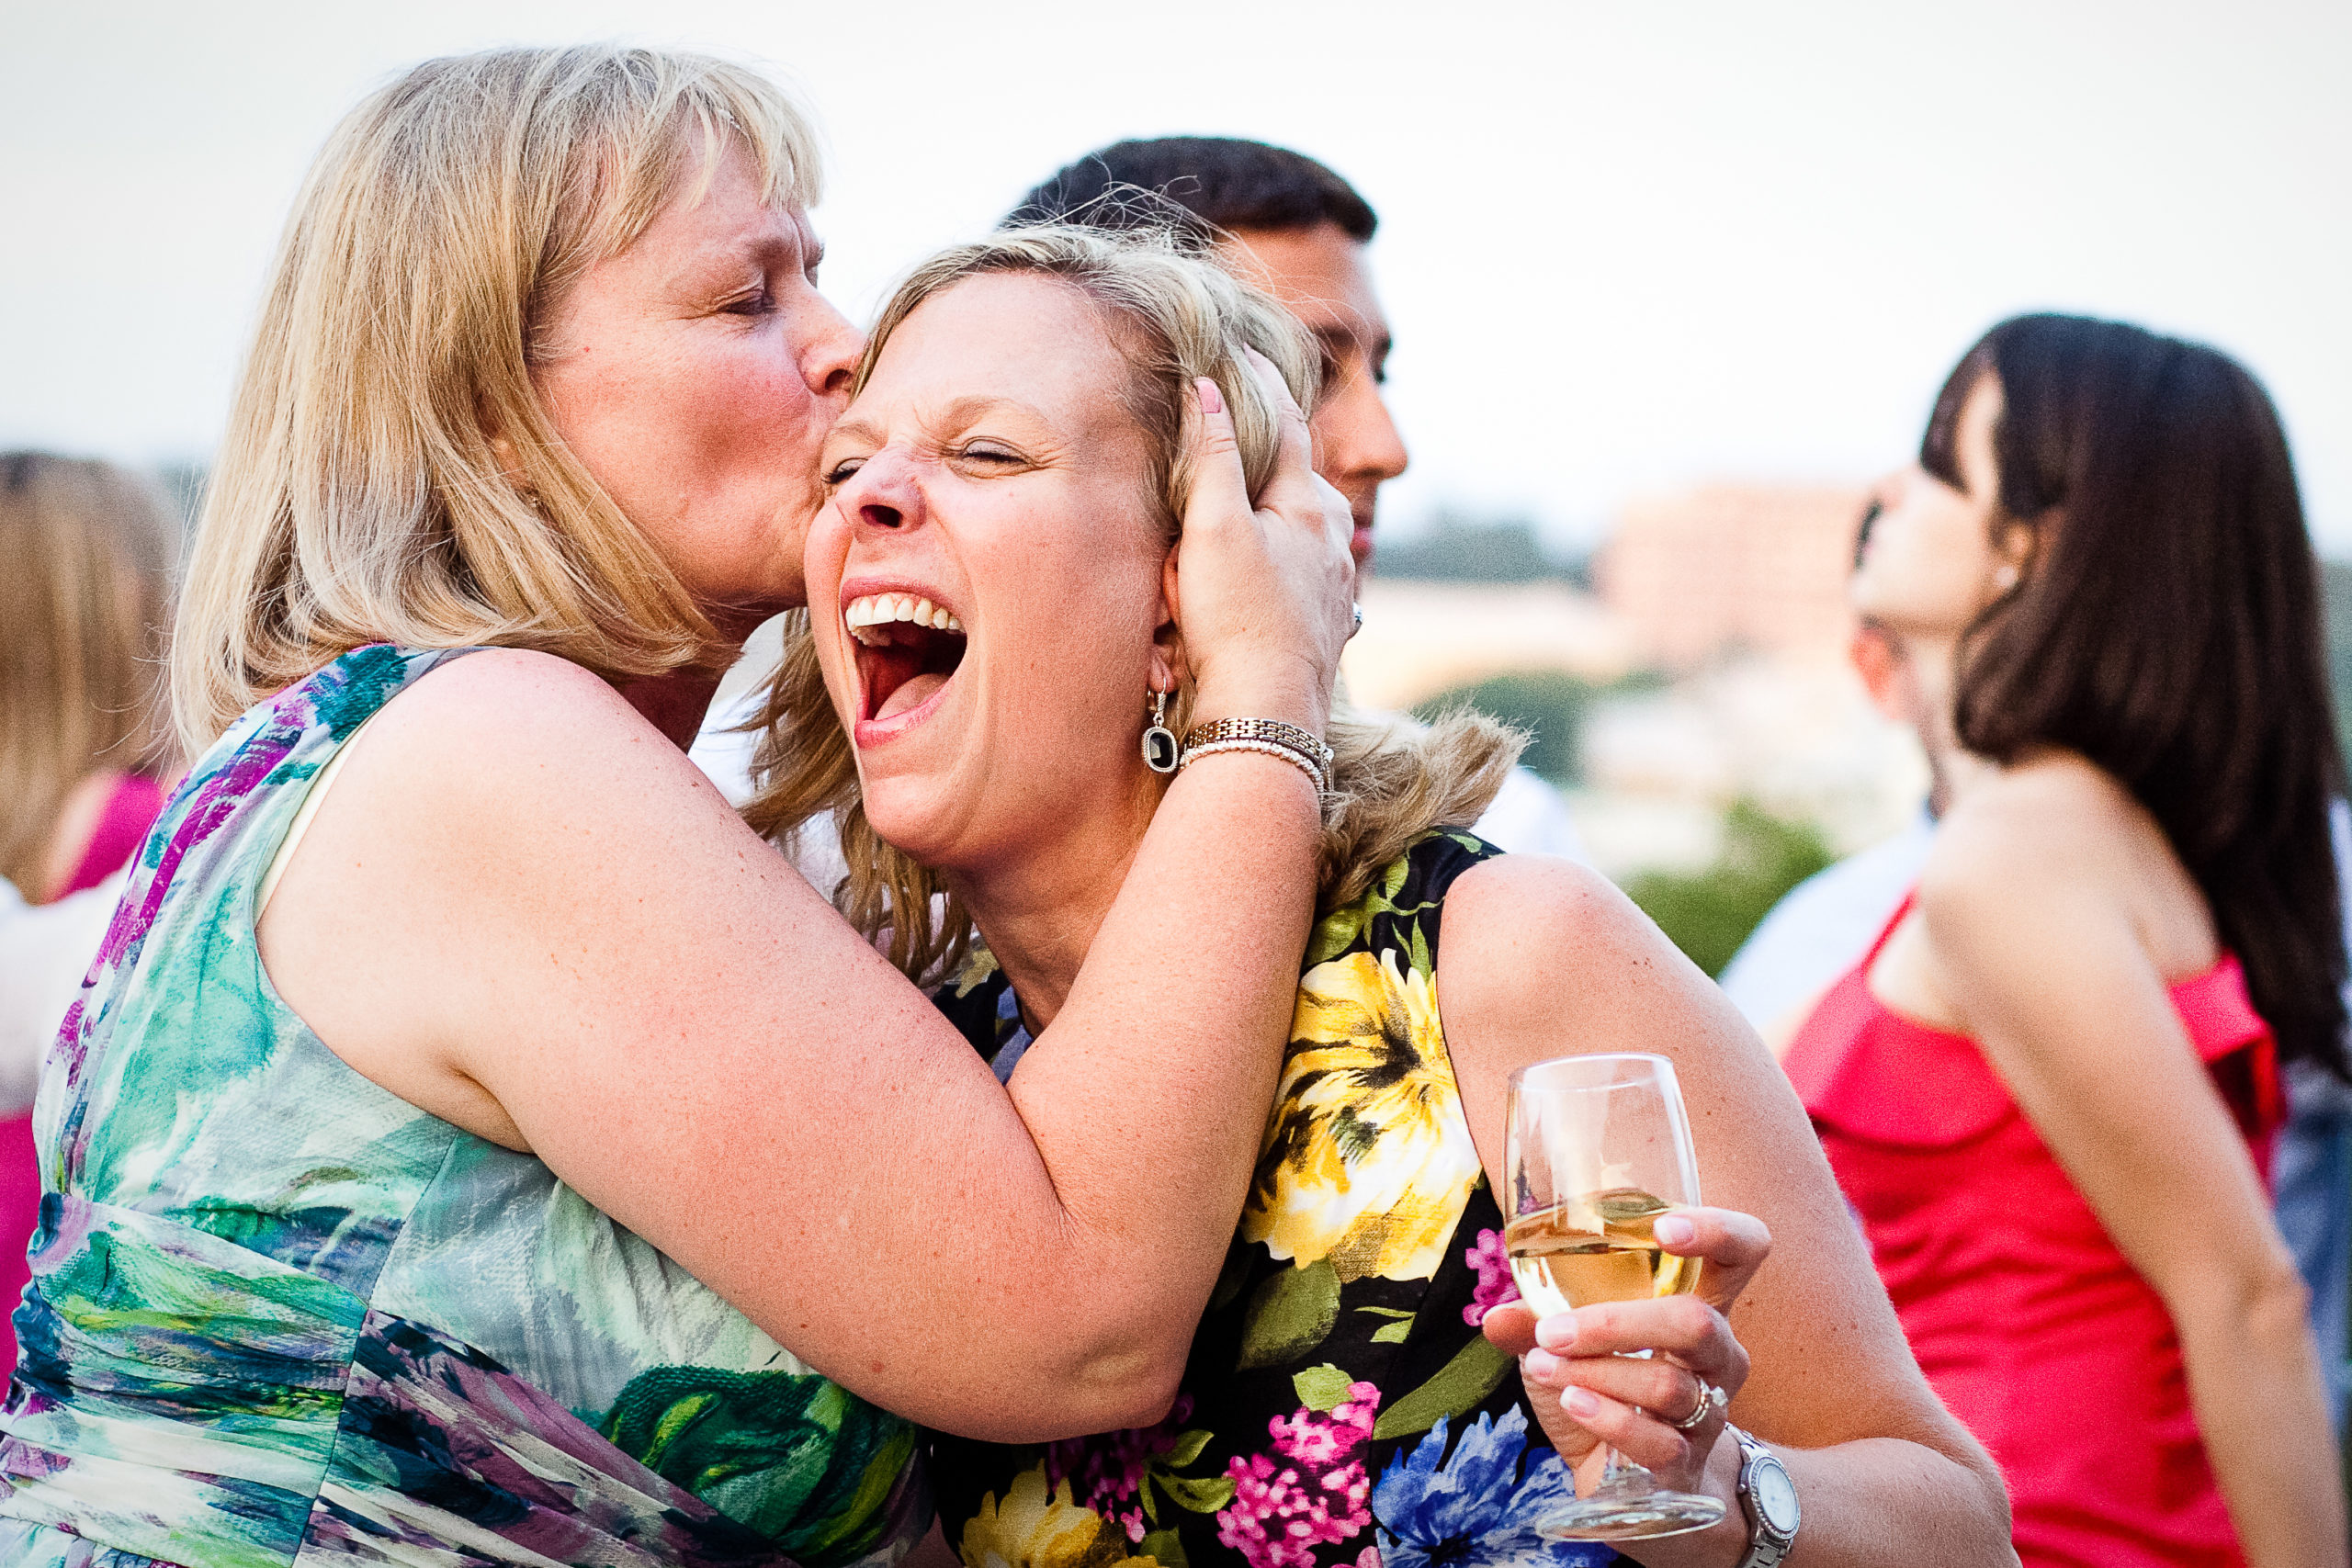 women laughing and kissing on a dance floor while holding wine